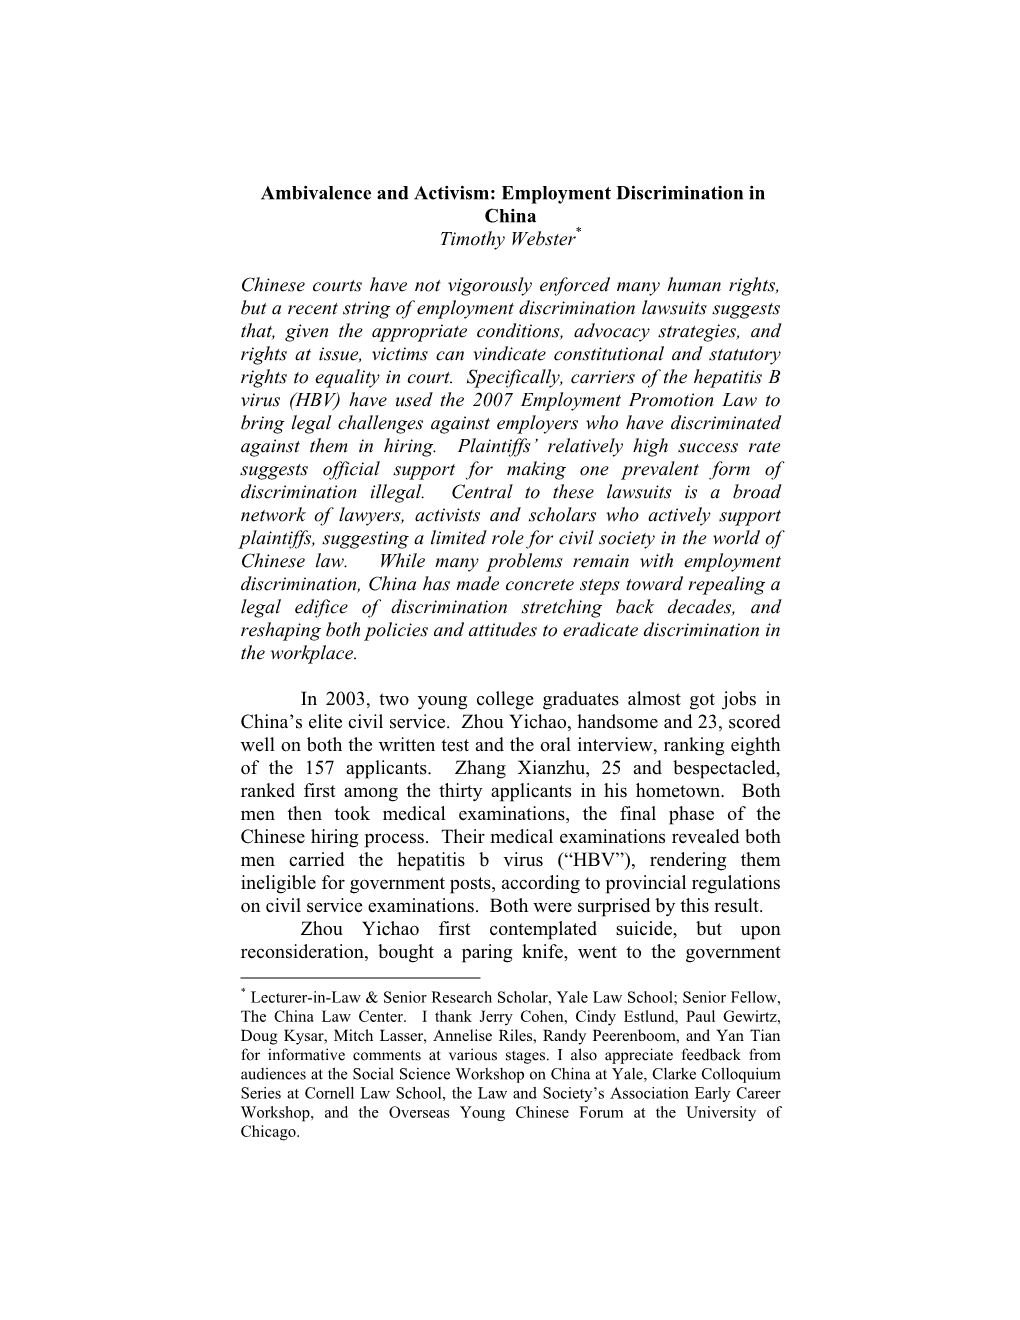 Ambivalence and Activism: Employment Discrimination in China Timothy Webster*